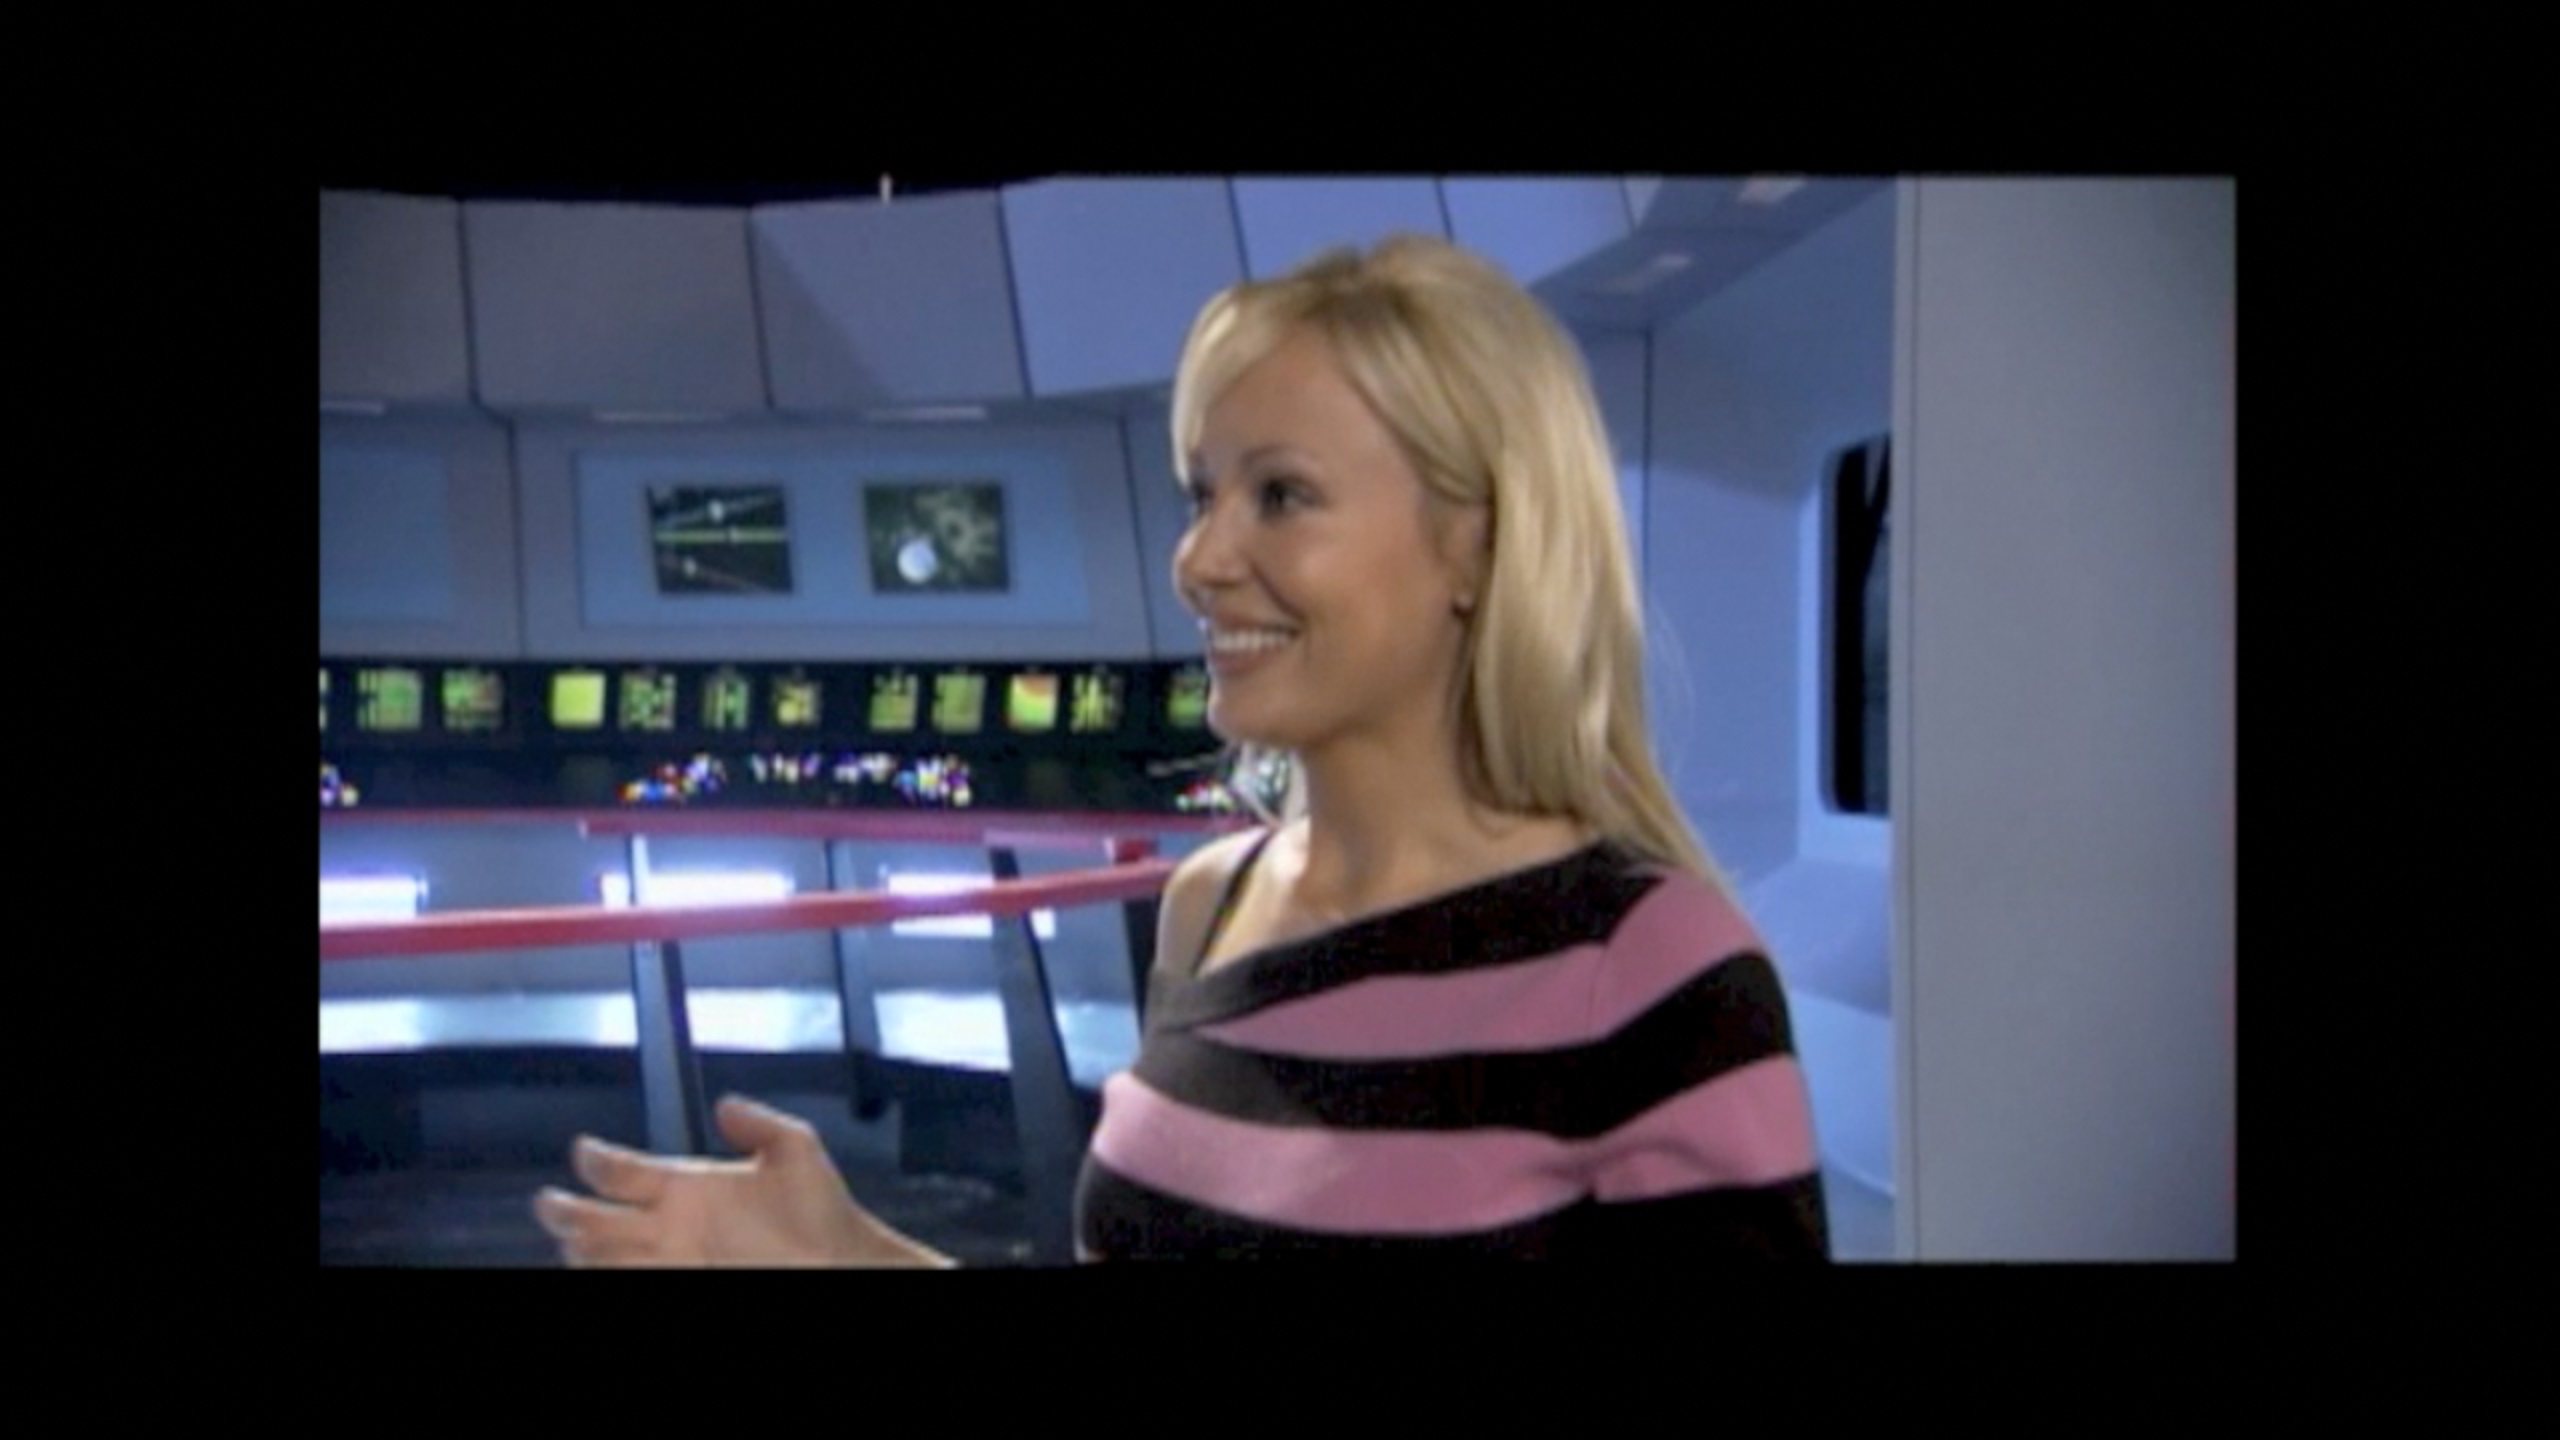 Screen Grab of Host Stacey Hayes from STAR TREK 